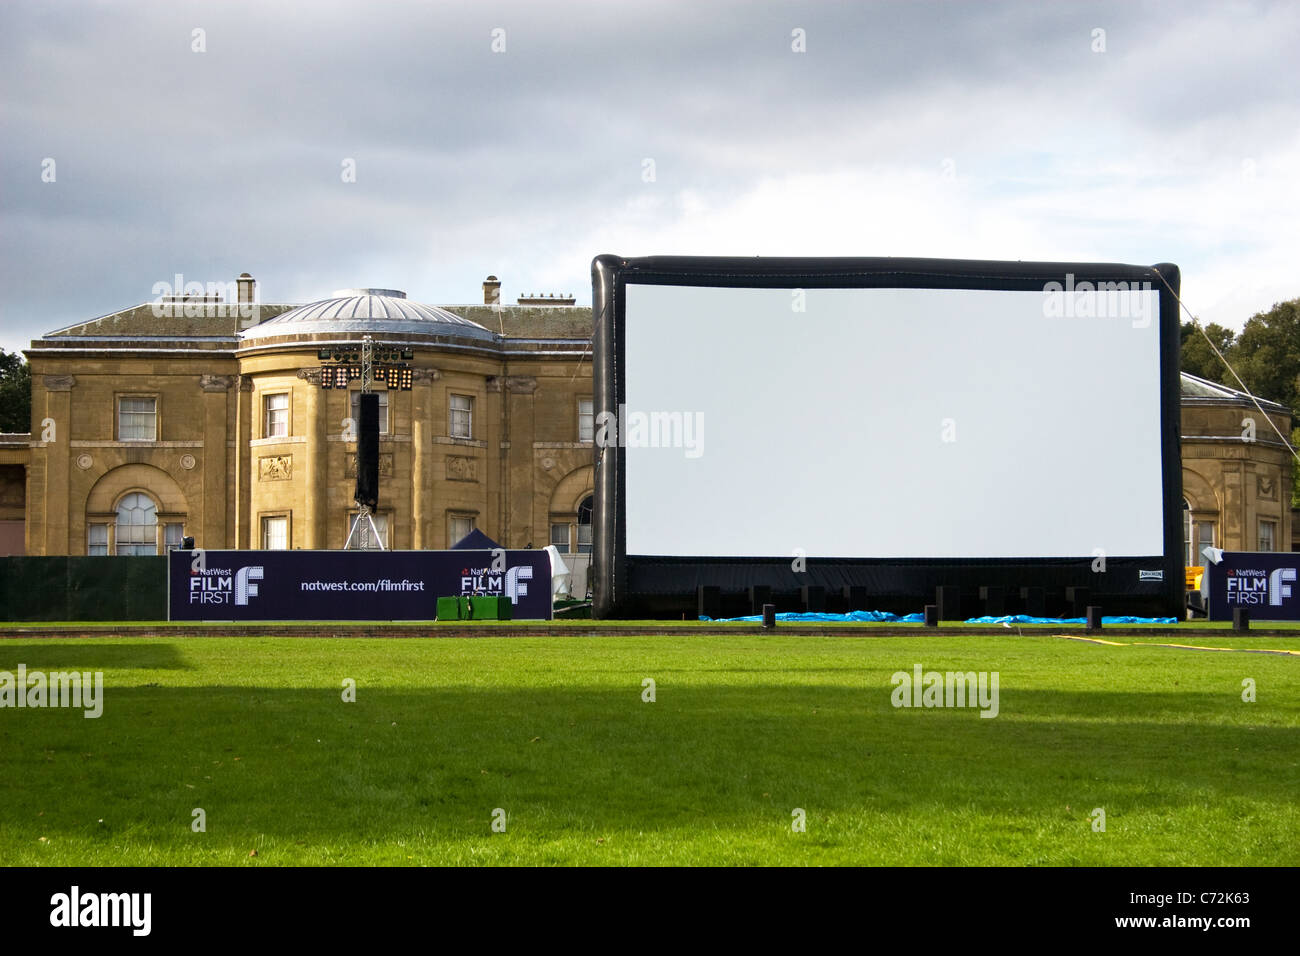 Natwest Film First outdoor screening.  Airscreen inflatable screen in front of Heaton Hall, Heaton Park, Manchester, England, UK Stock Photo